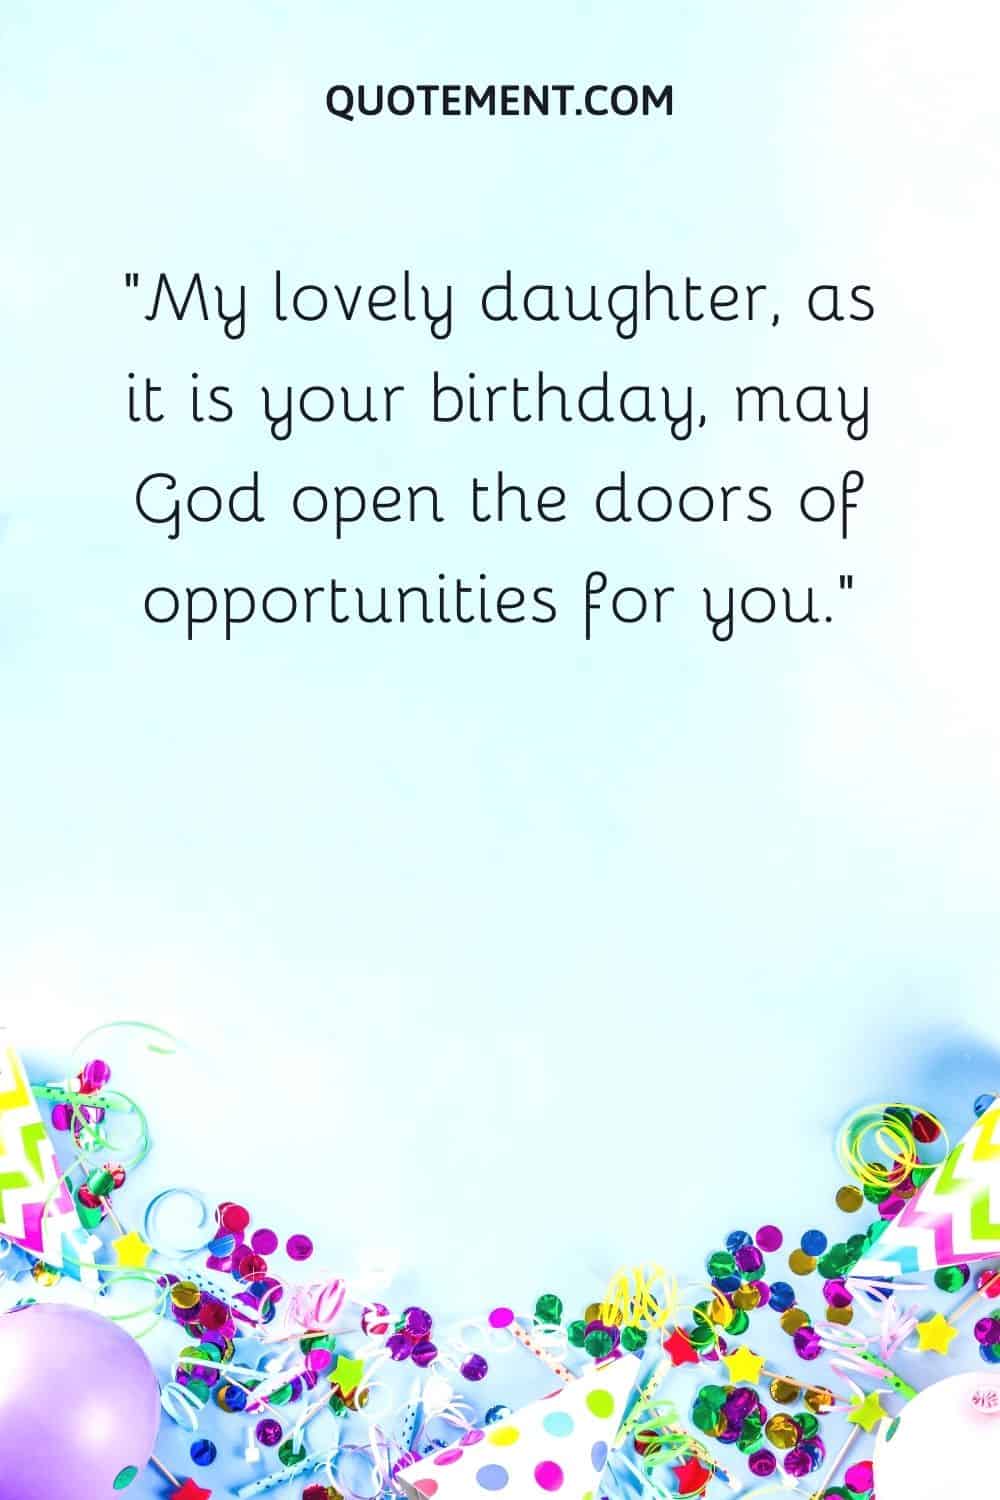 may God open the doors of opportunities for you